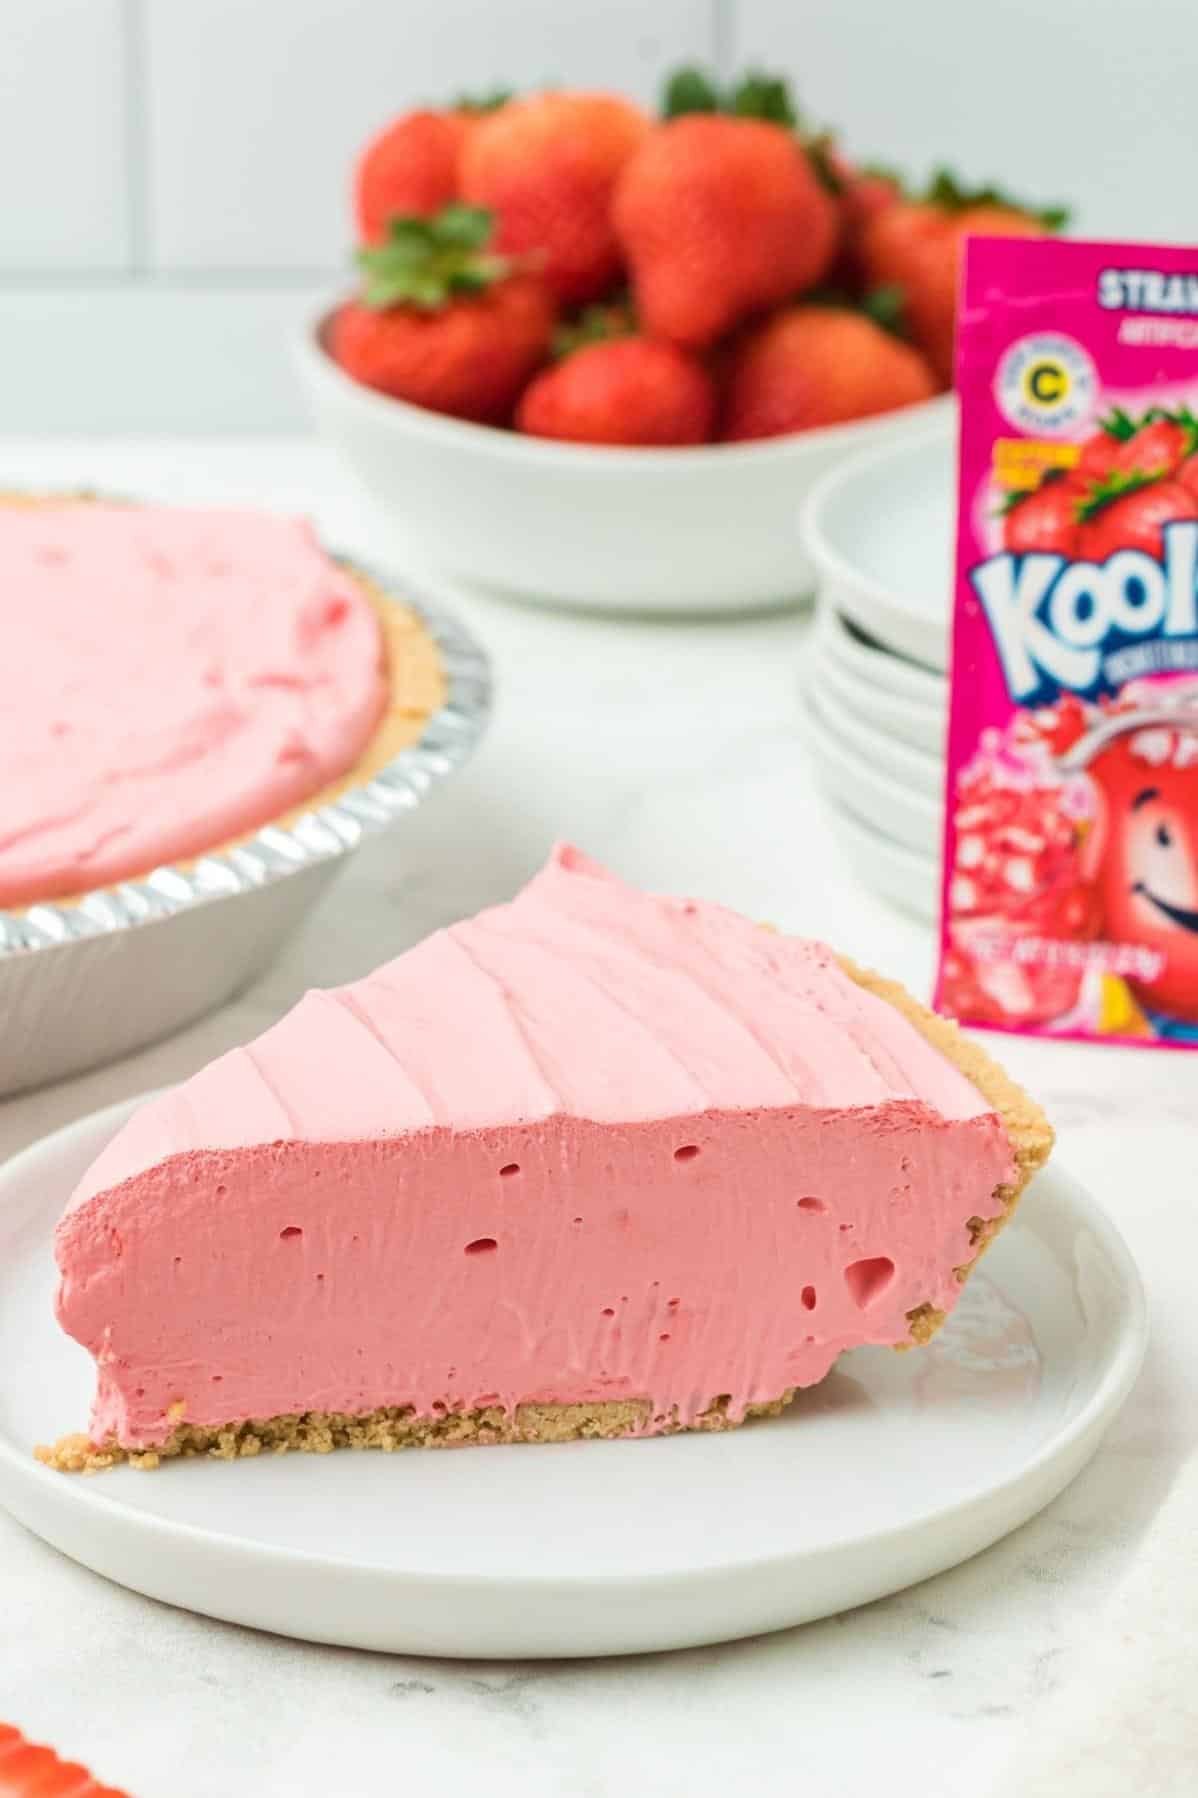  Beating the scorching sun has never been easier! Just whip up this delicious Kool-Aid Pie!